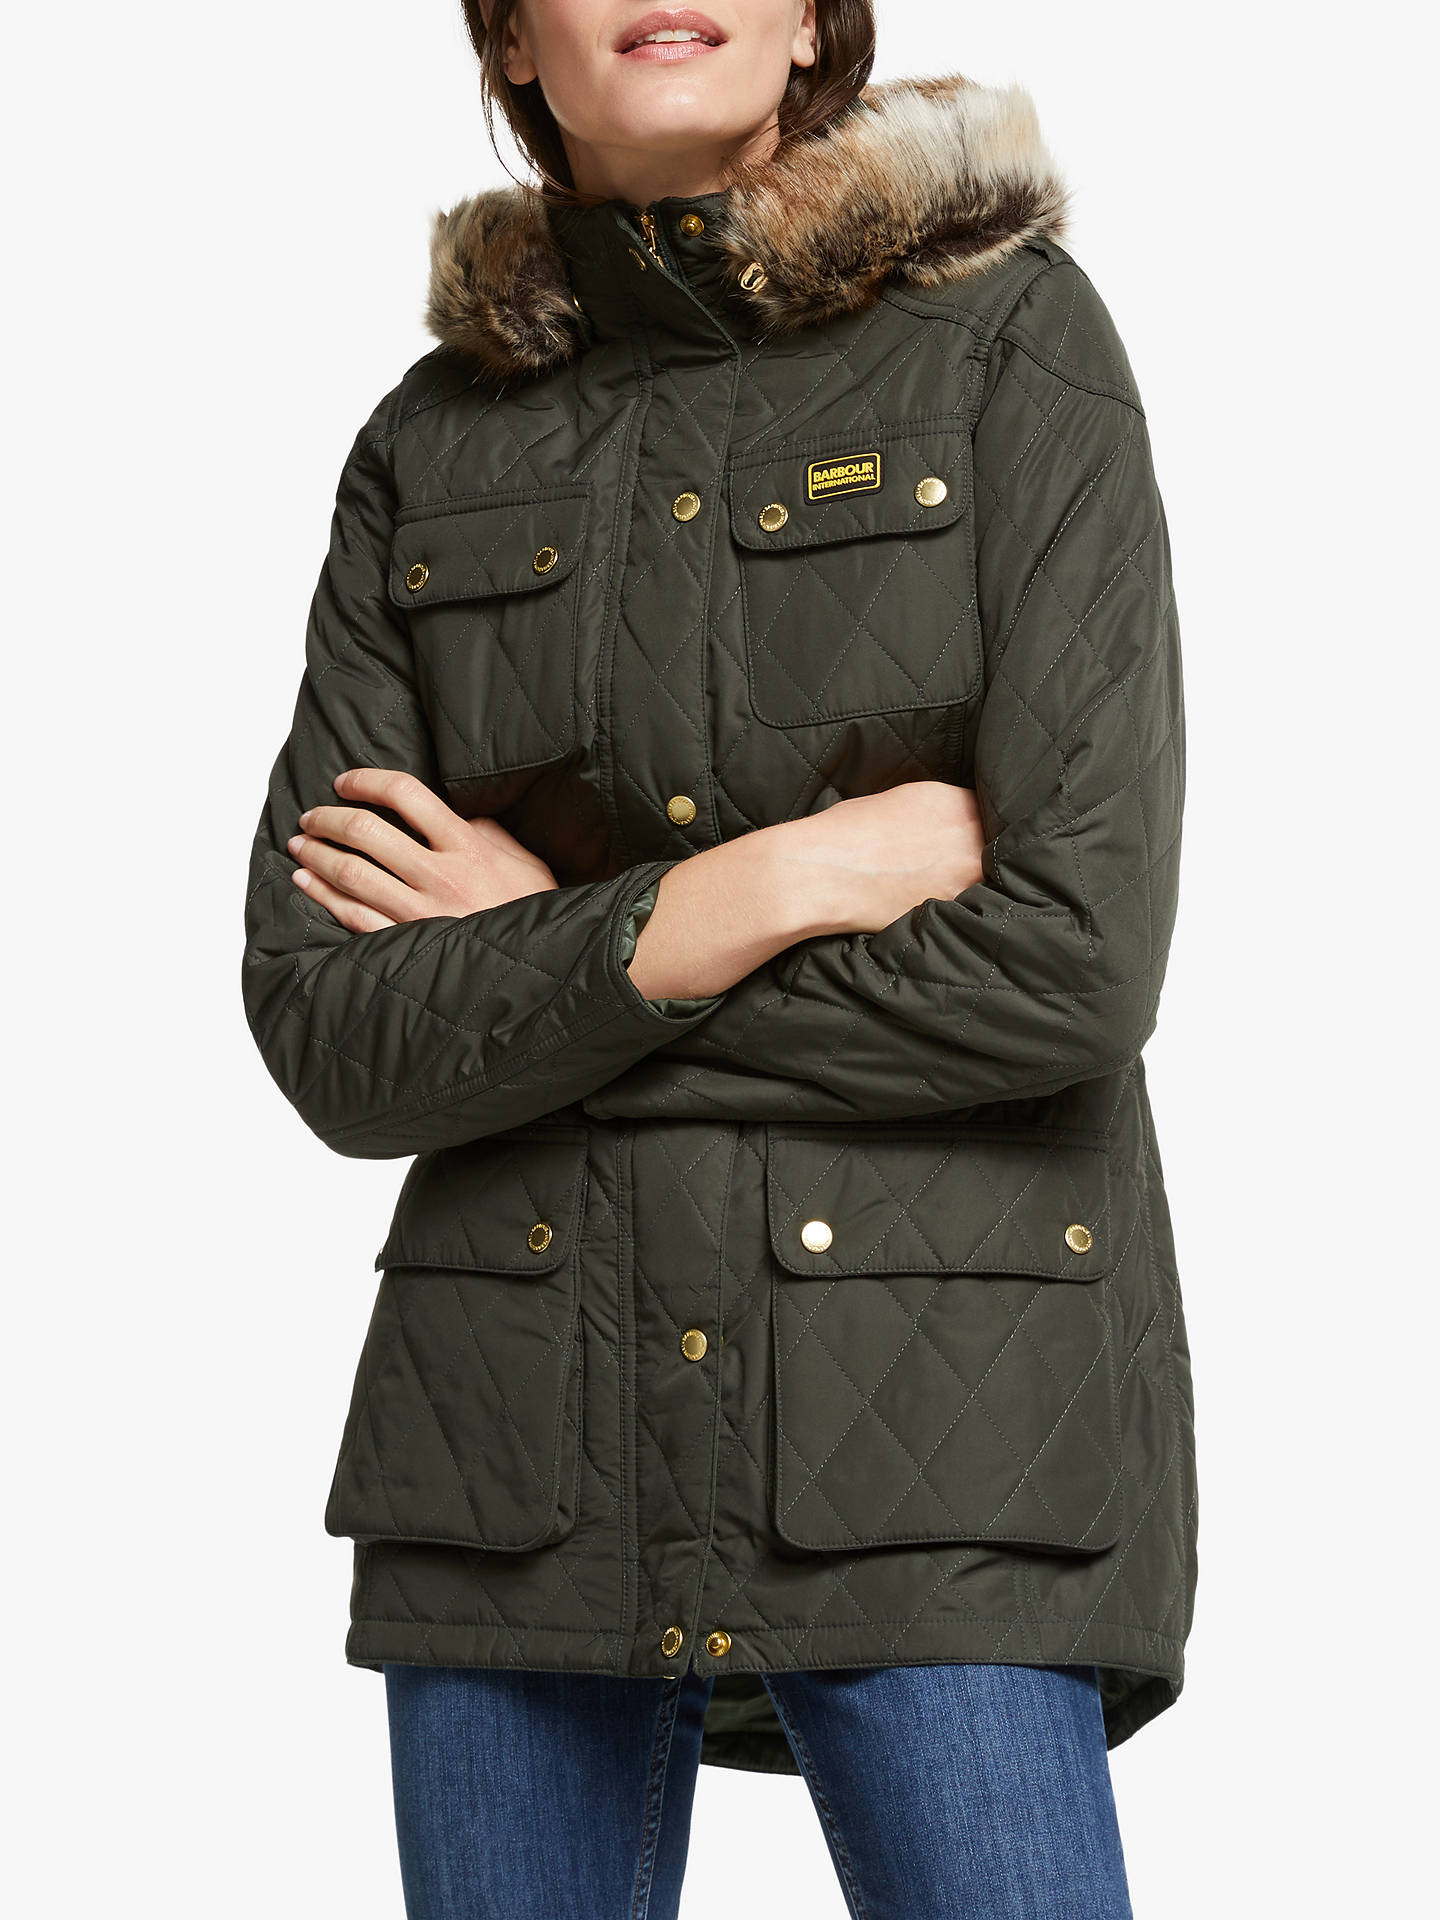 Barbour International Enduro Quilted Hooded Jacket at John Lewis & Partners